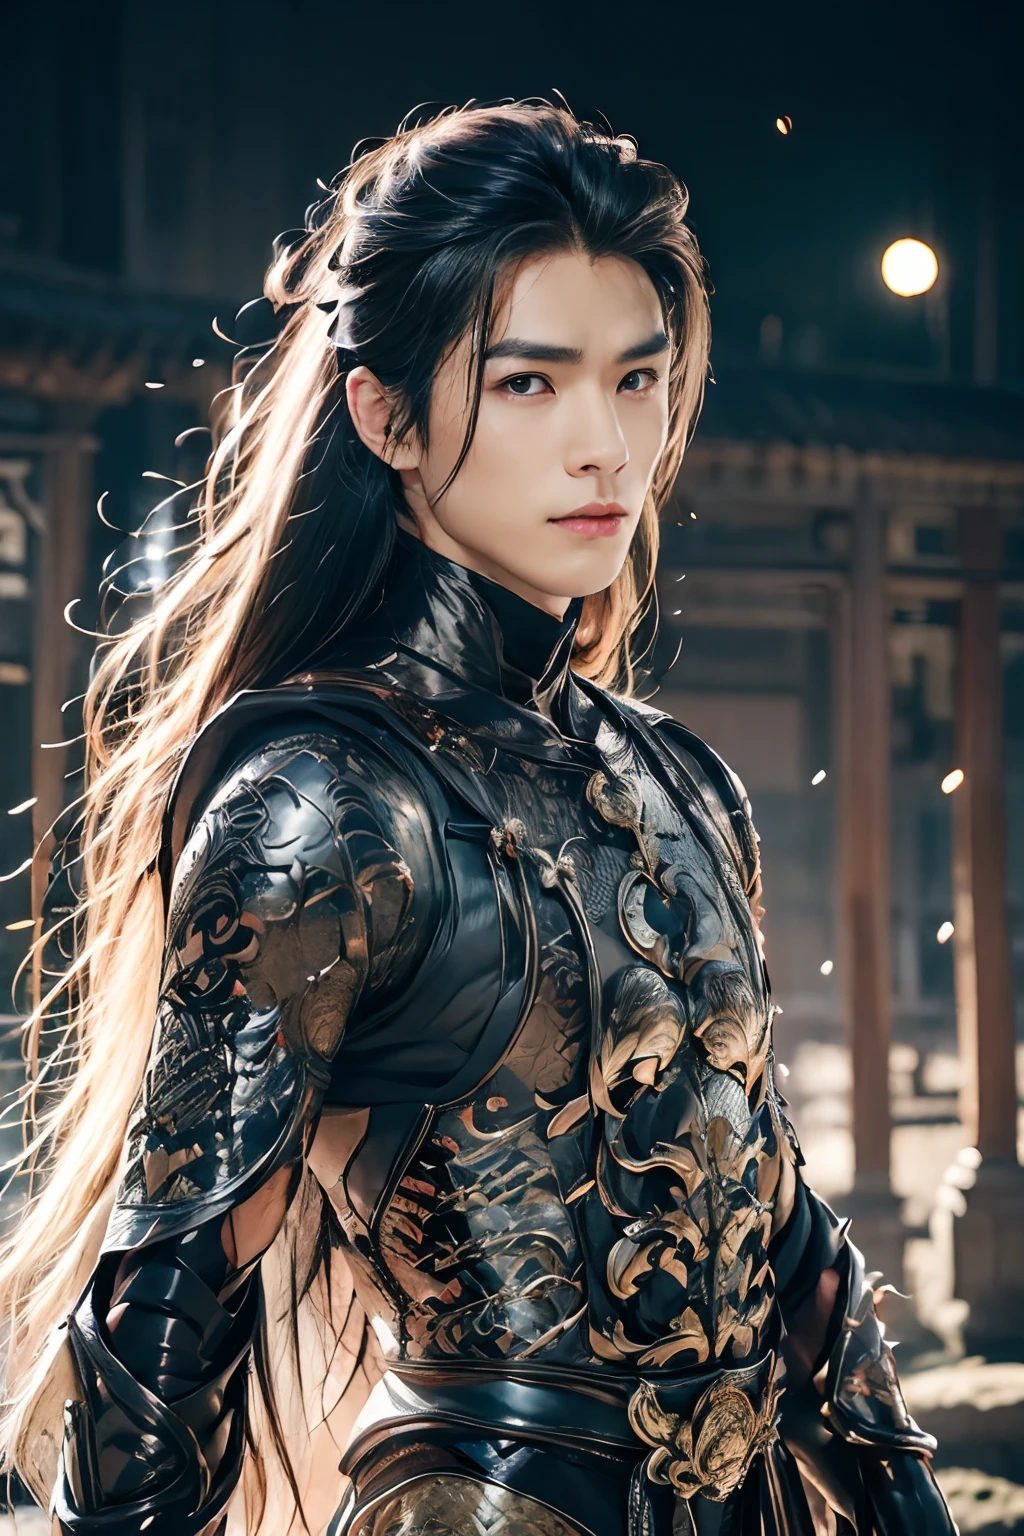 A 21-year-old Asian man，Thick eyebrowelon seed face，Handsome face，Men's full body ，A transparent streamer is tied to the body and flutters in the wind，The background is an ancient Chinese town，Time is night。Deep blue sky，A full moon，Lots of black lanterns，Pavilions and arch bridges，His skin is fair，He is slender,  The limbs have pronounced muscle lines，high-definition photography，Real-world scenarios，Lots of detail, wearing black long coat, black long pants, black turtleneck shirt, lightning, magic, messy long hair, battle pose, warrior, looking at viewer, devilish gaze at viewer